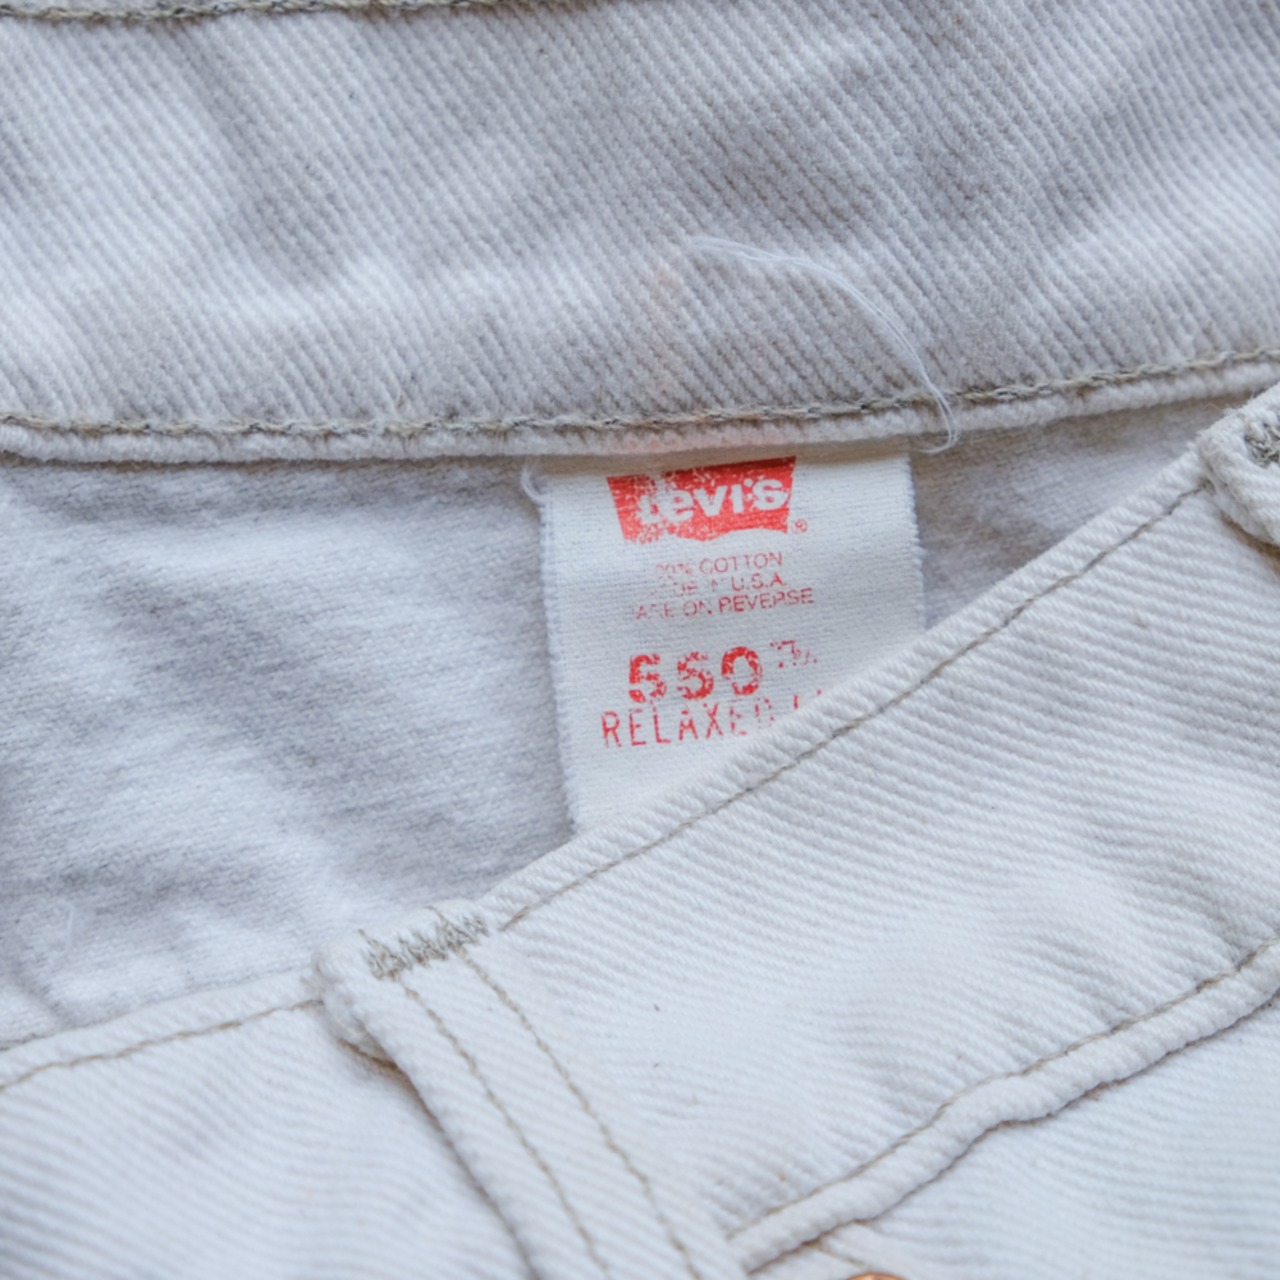 Levi's 550 Half Pants White made in USA